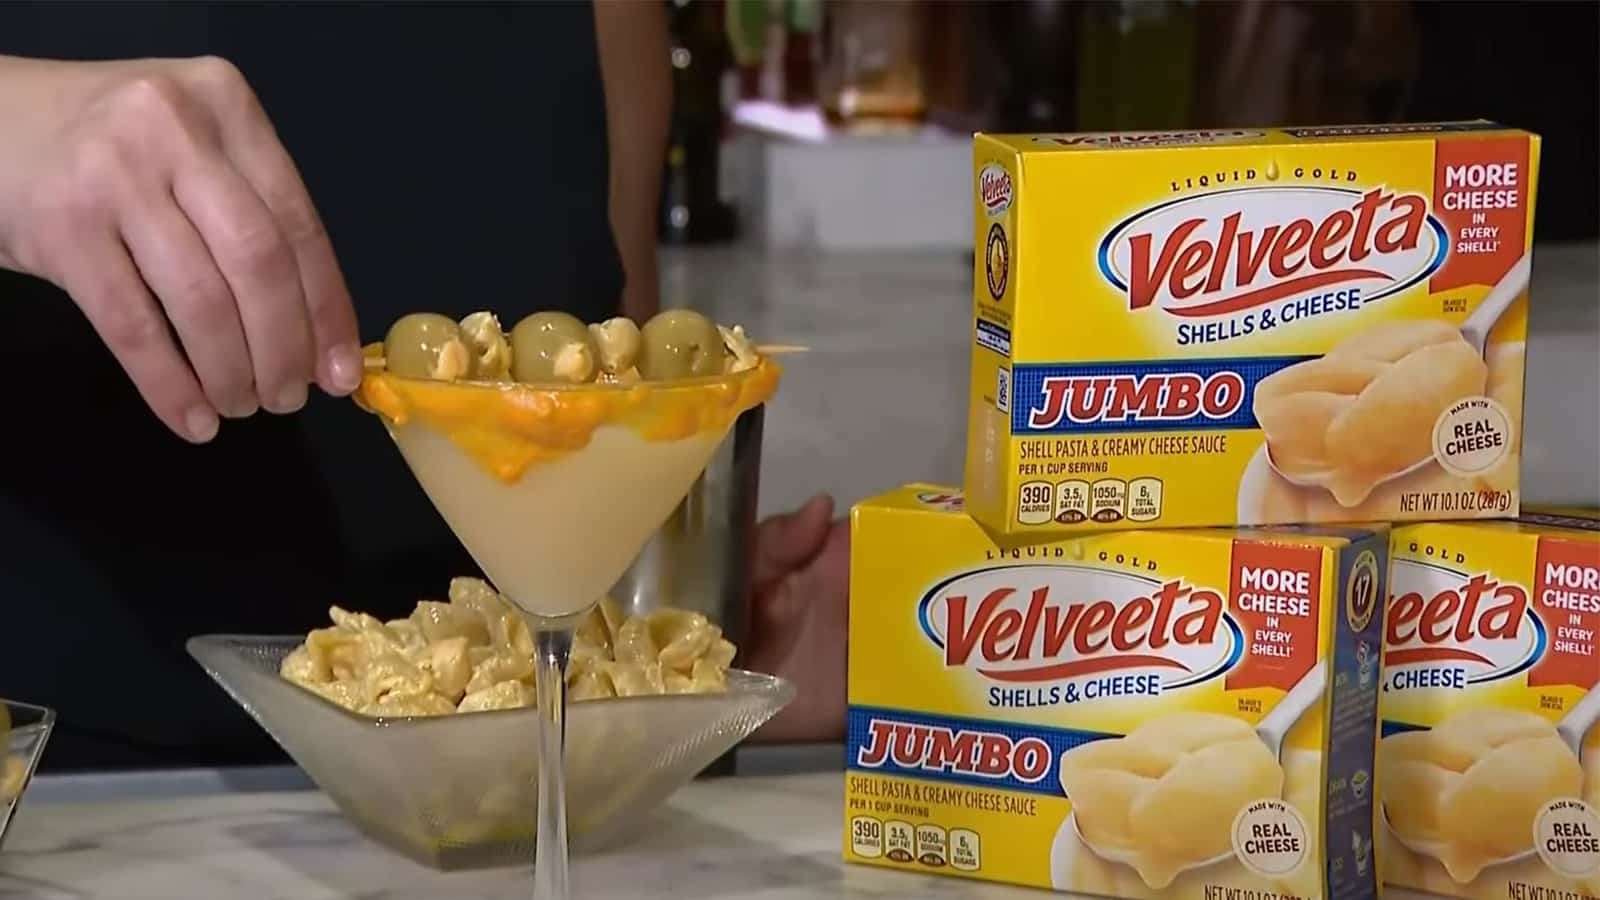 The internet is grossed out by Velveeta martini